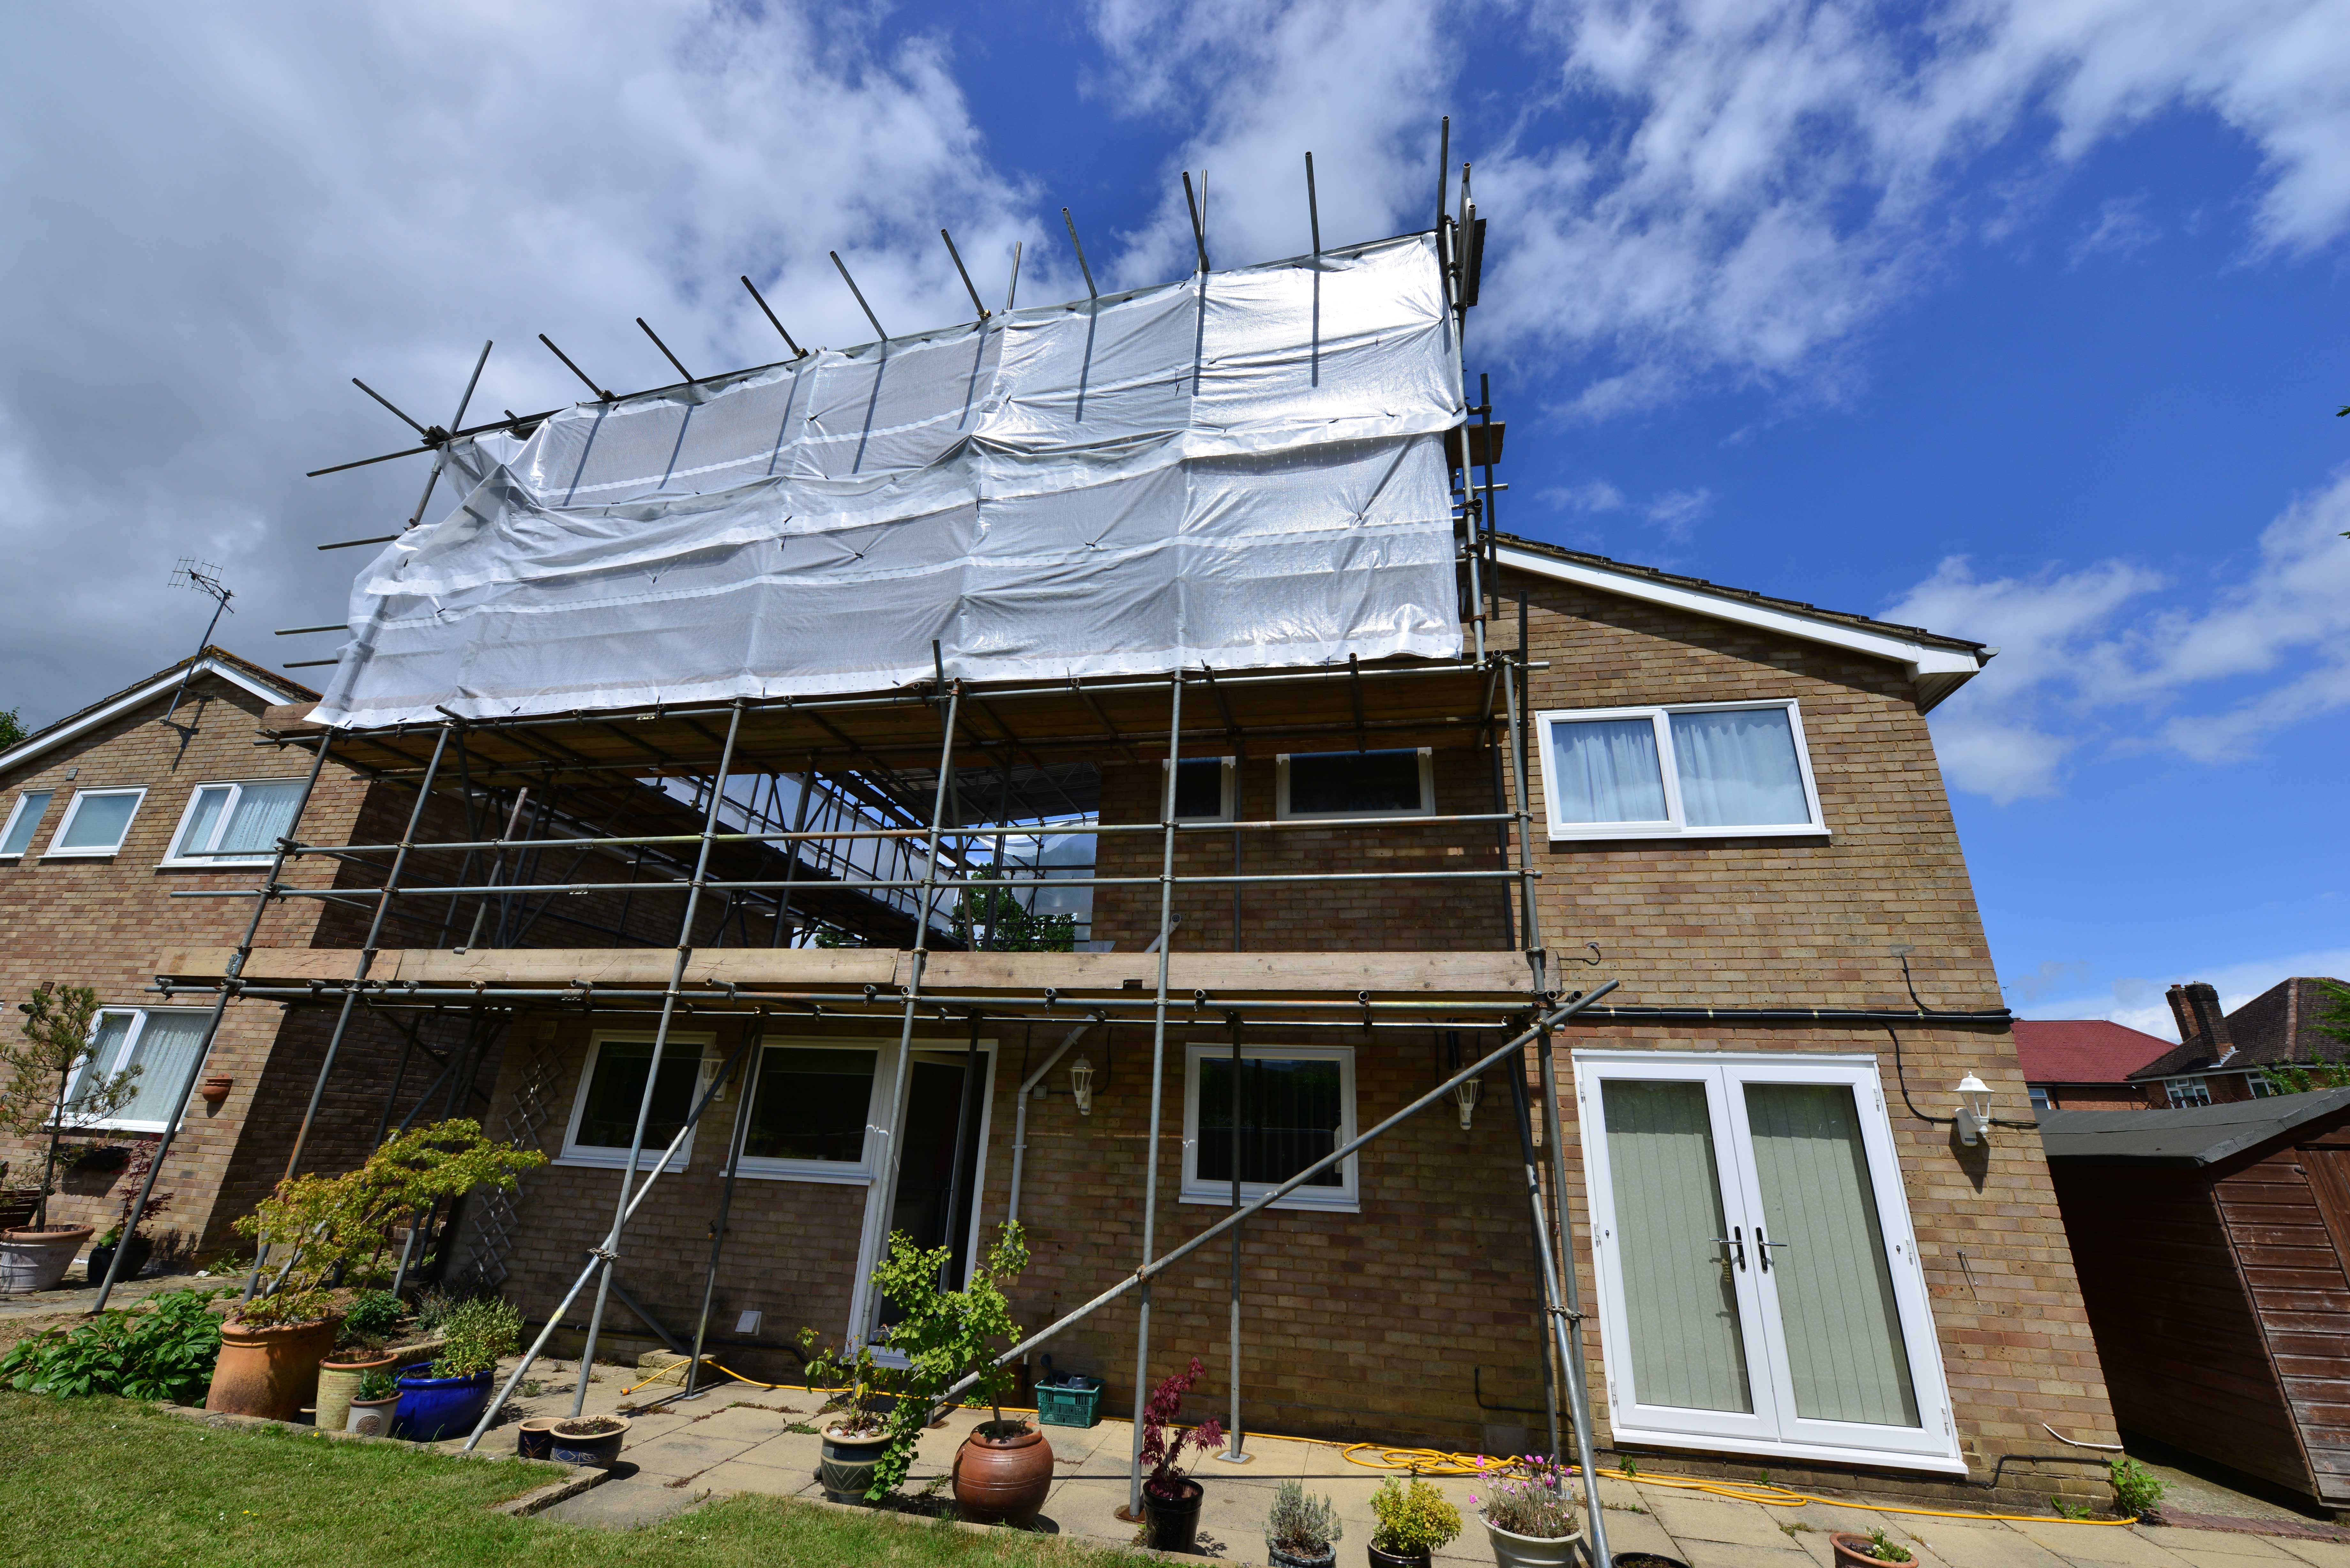 scaffolding on house